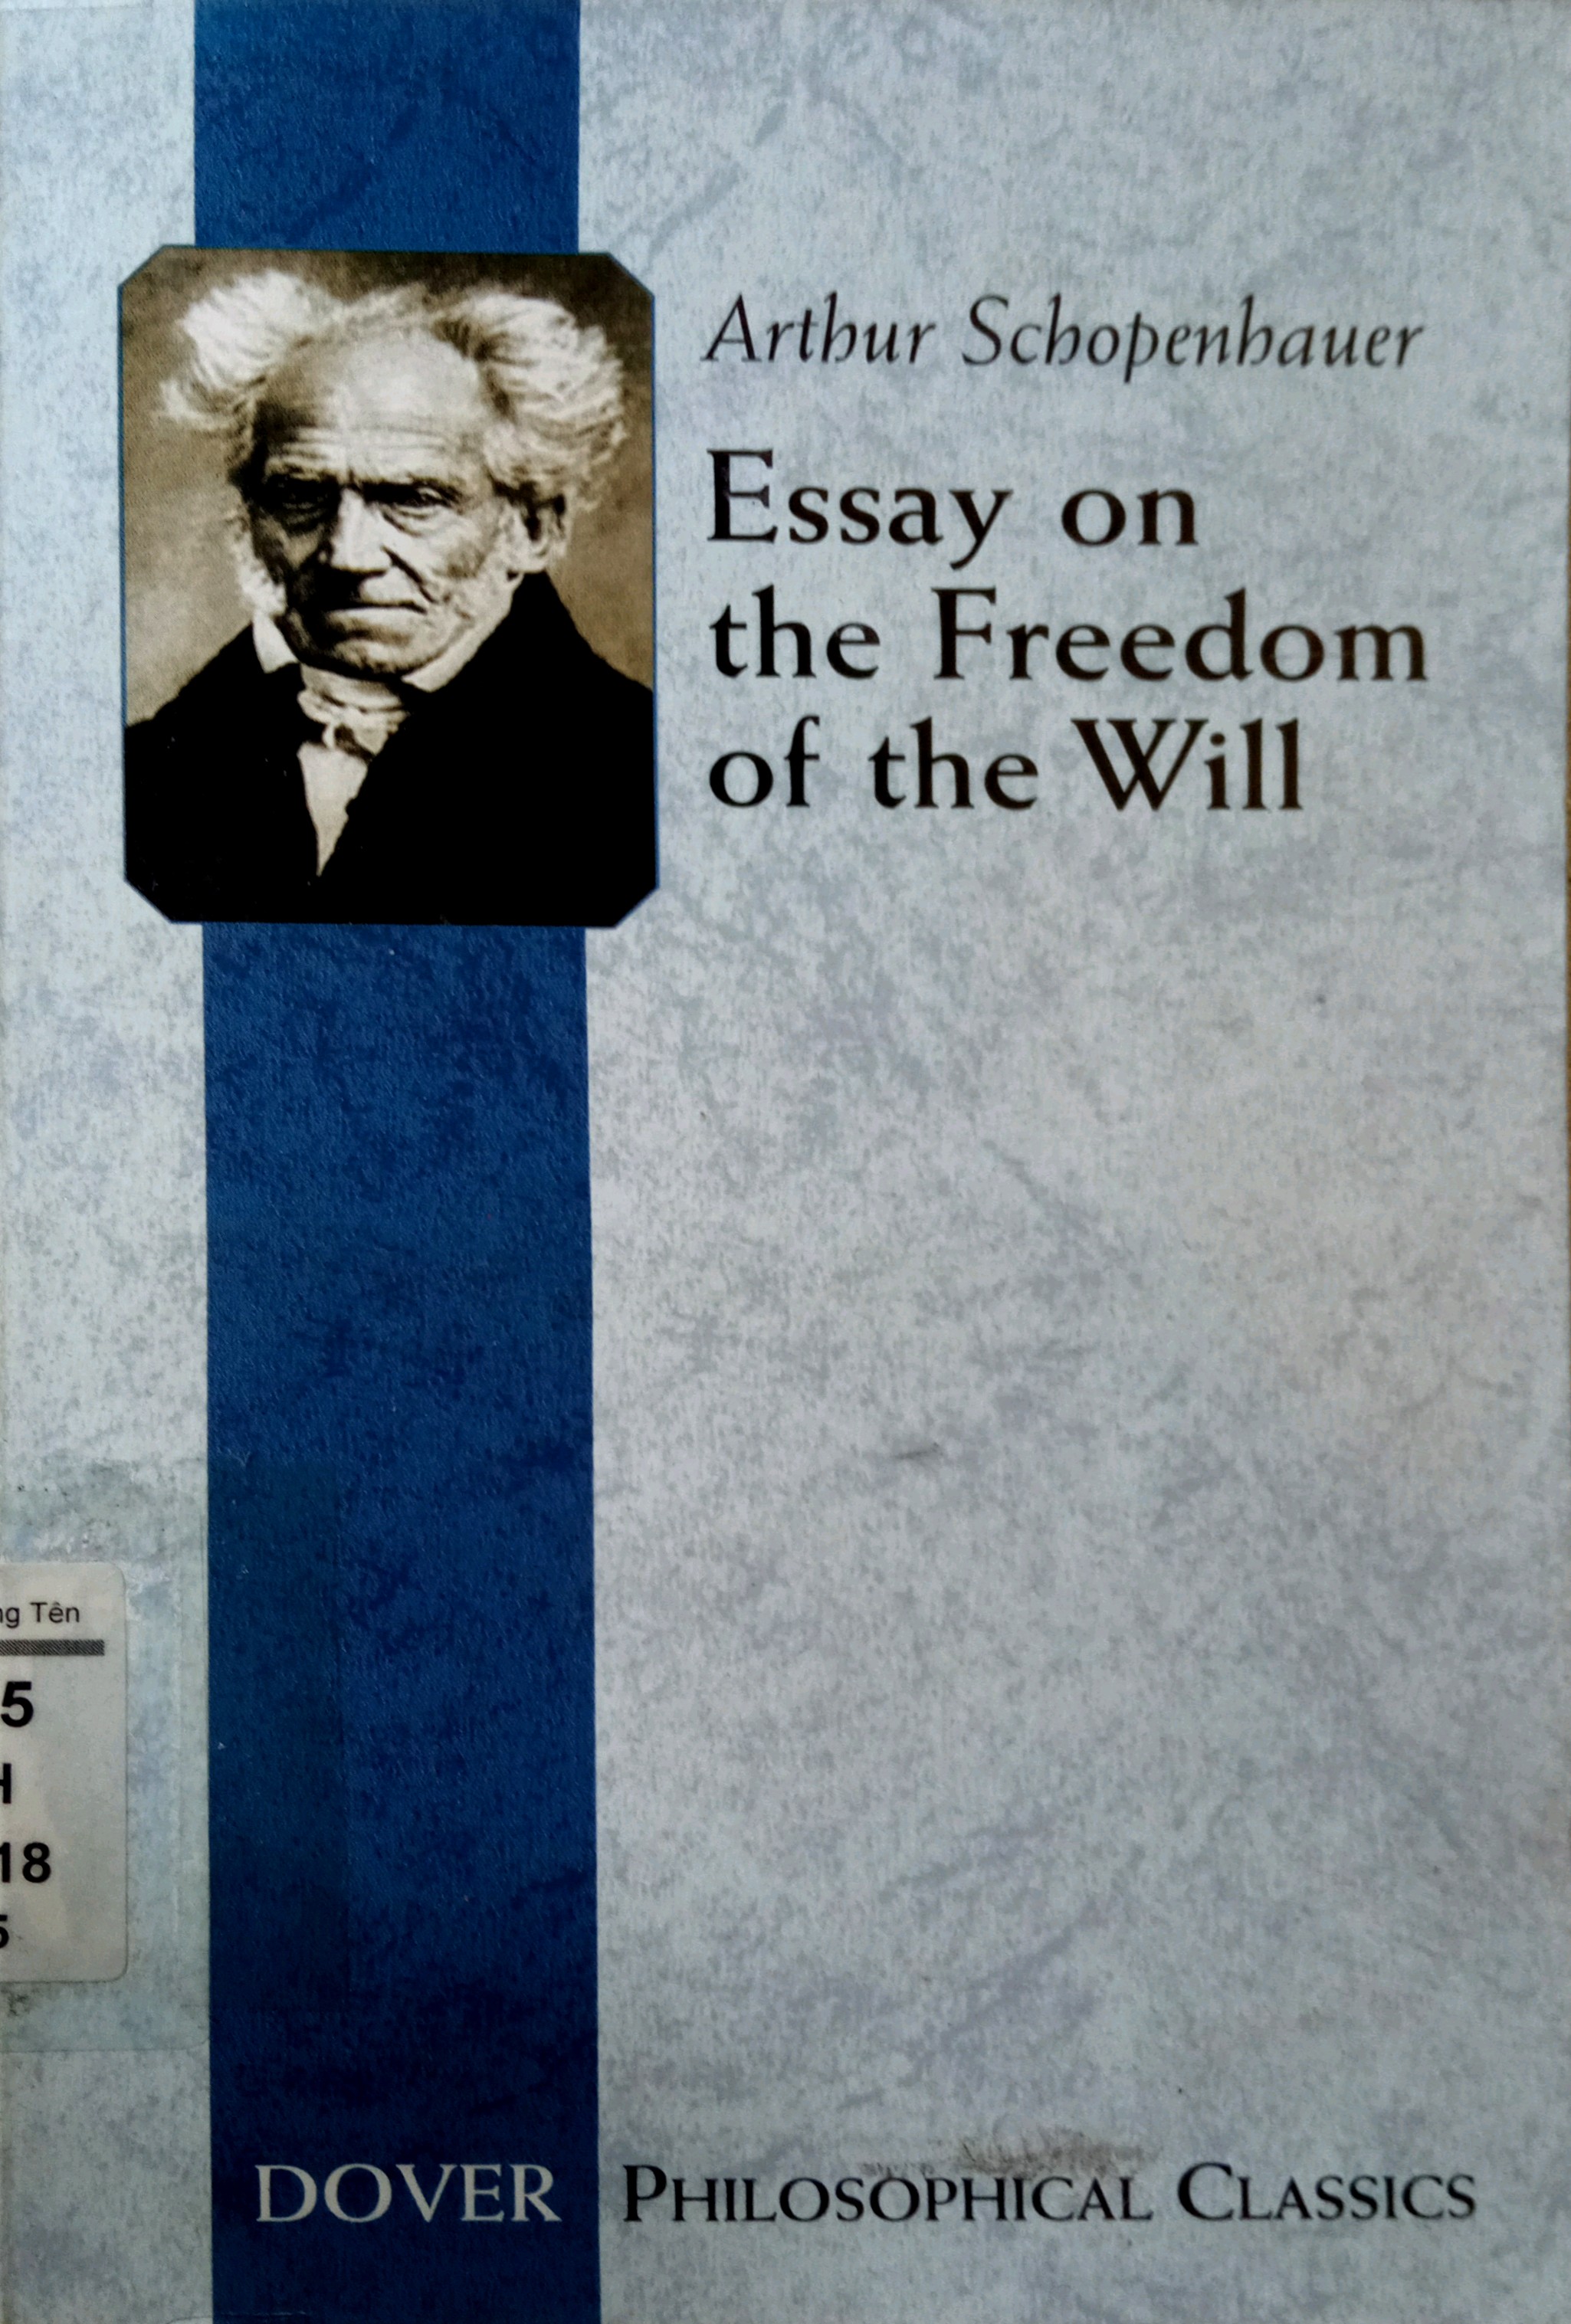 ESSAY ON THE FREEDOM OF THE WILL